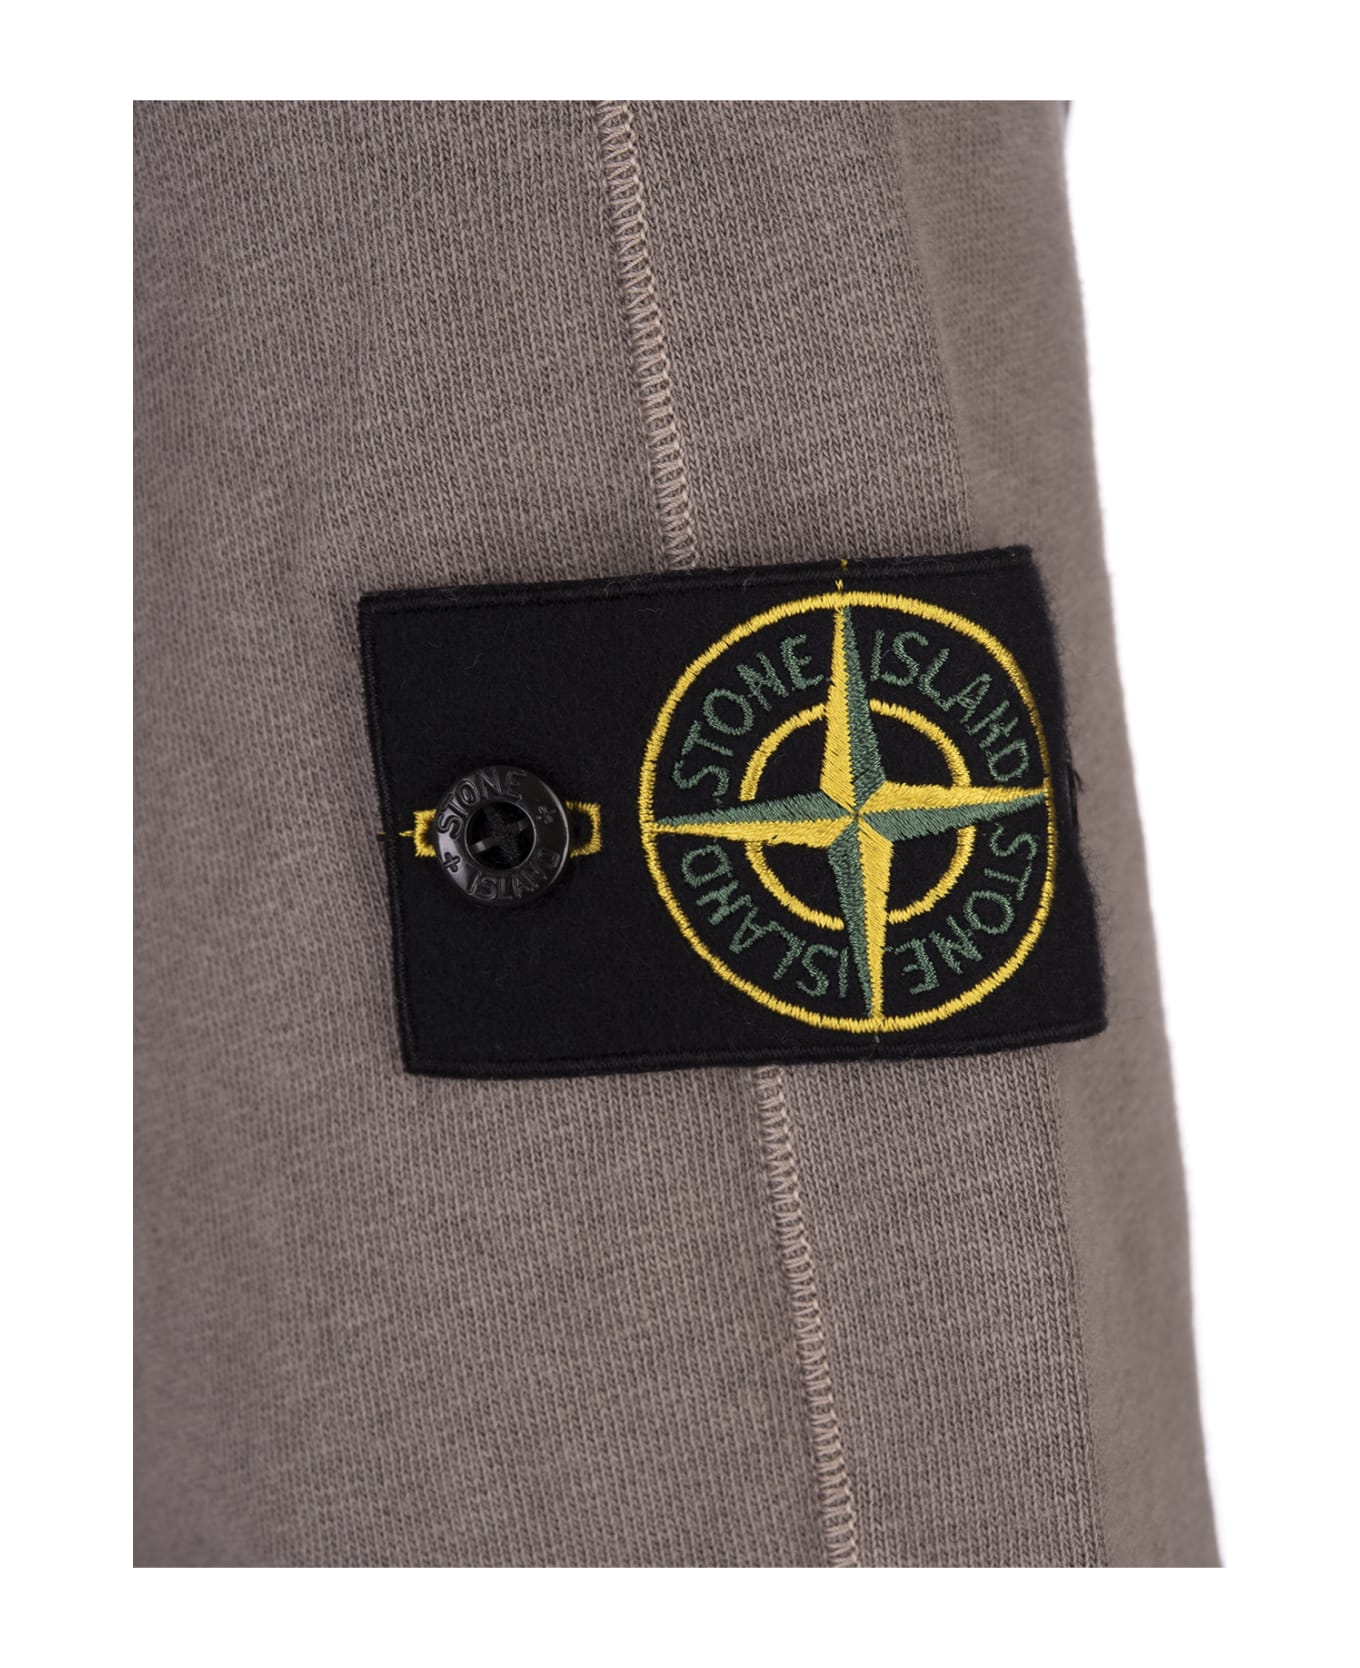 Stone Island Dove Zip-up Hoodie With 'old' Treatment - Brown